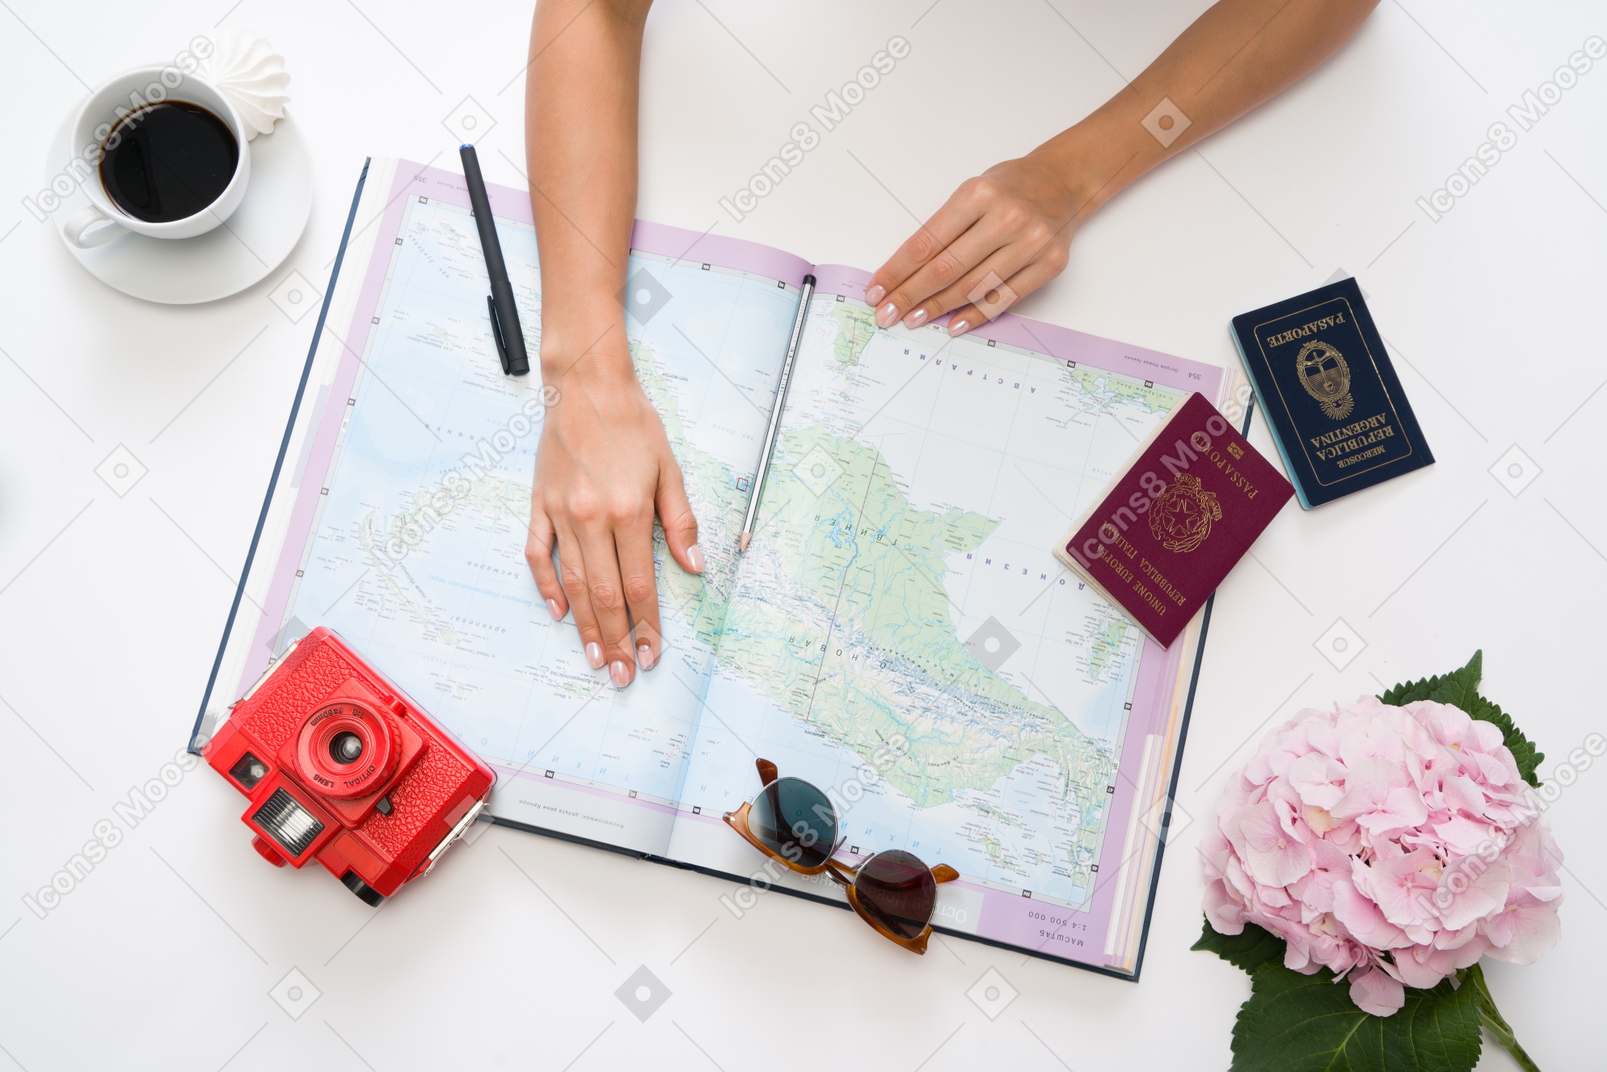 Female hands next to map, red camera, cup of coffee, passports and sunglasses